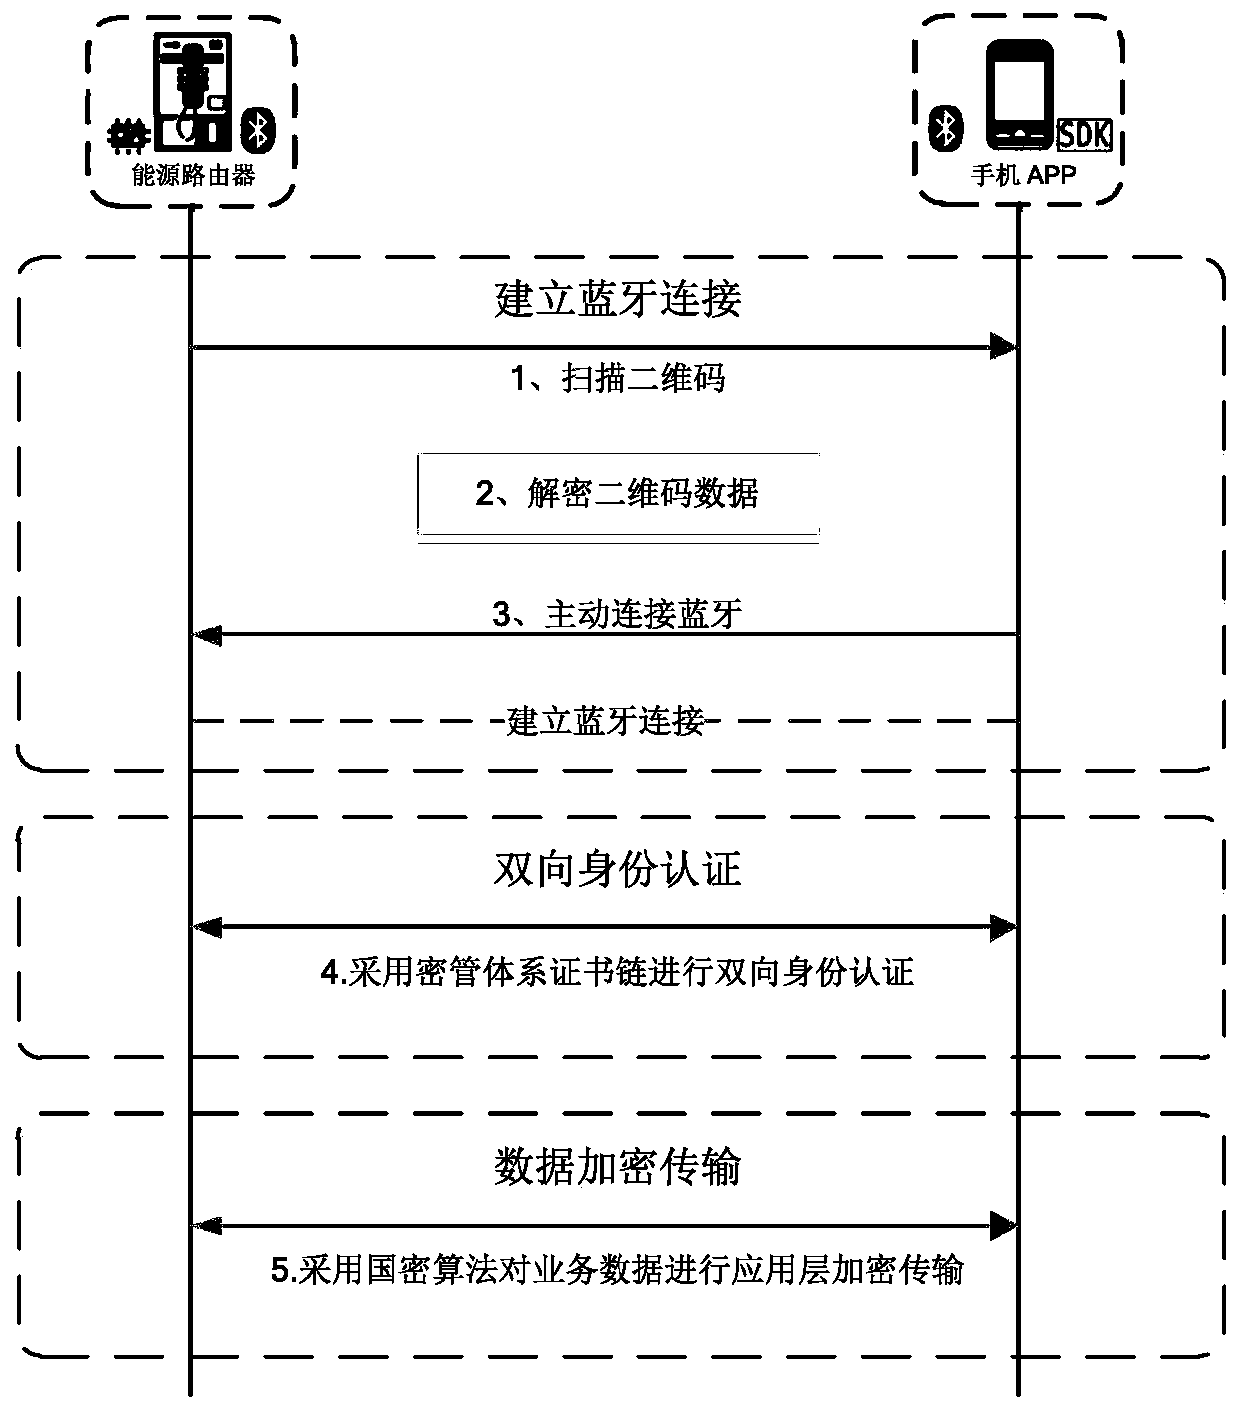 Bluetooth communication safety protection method for electric power marketing major